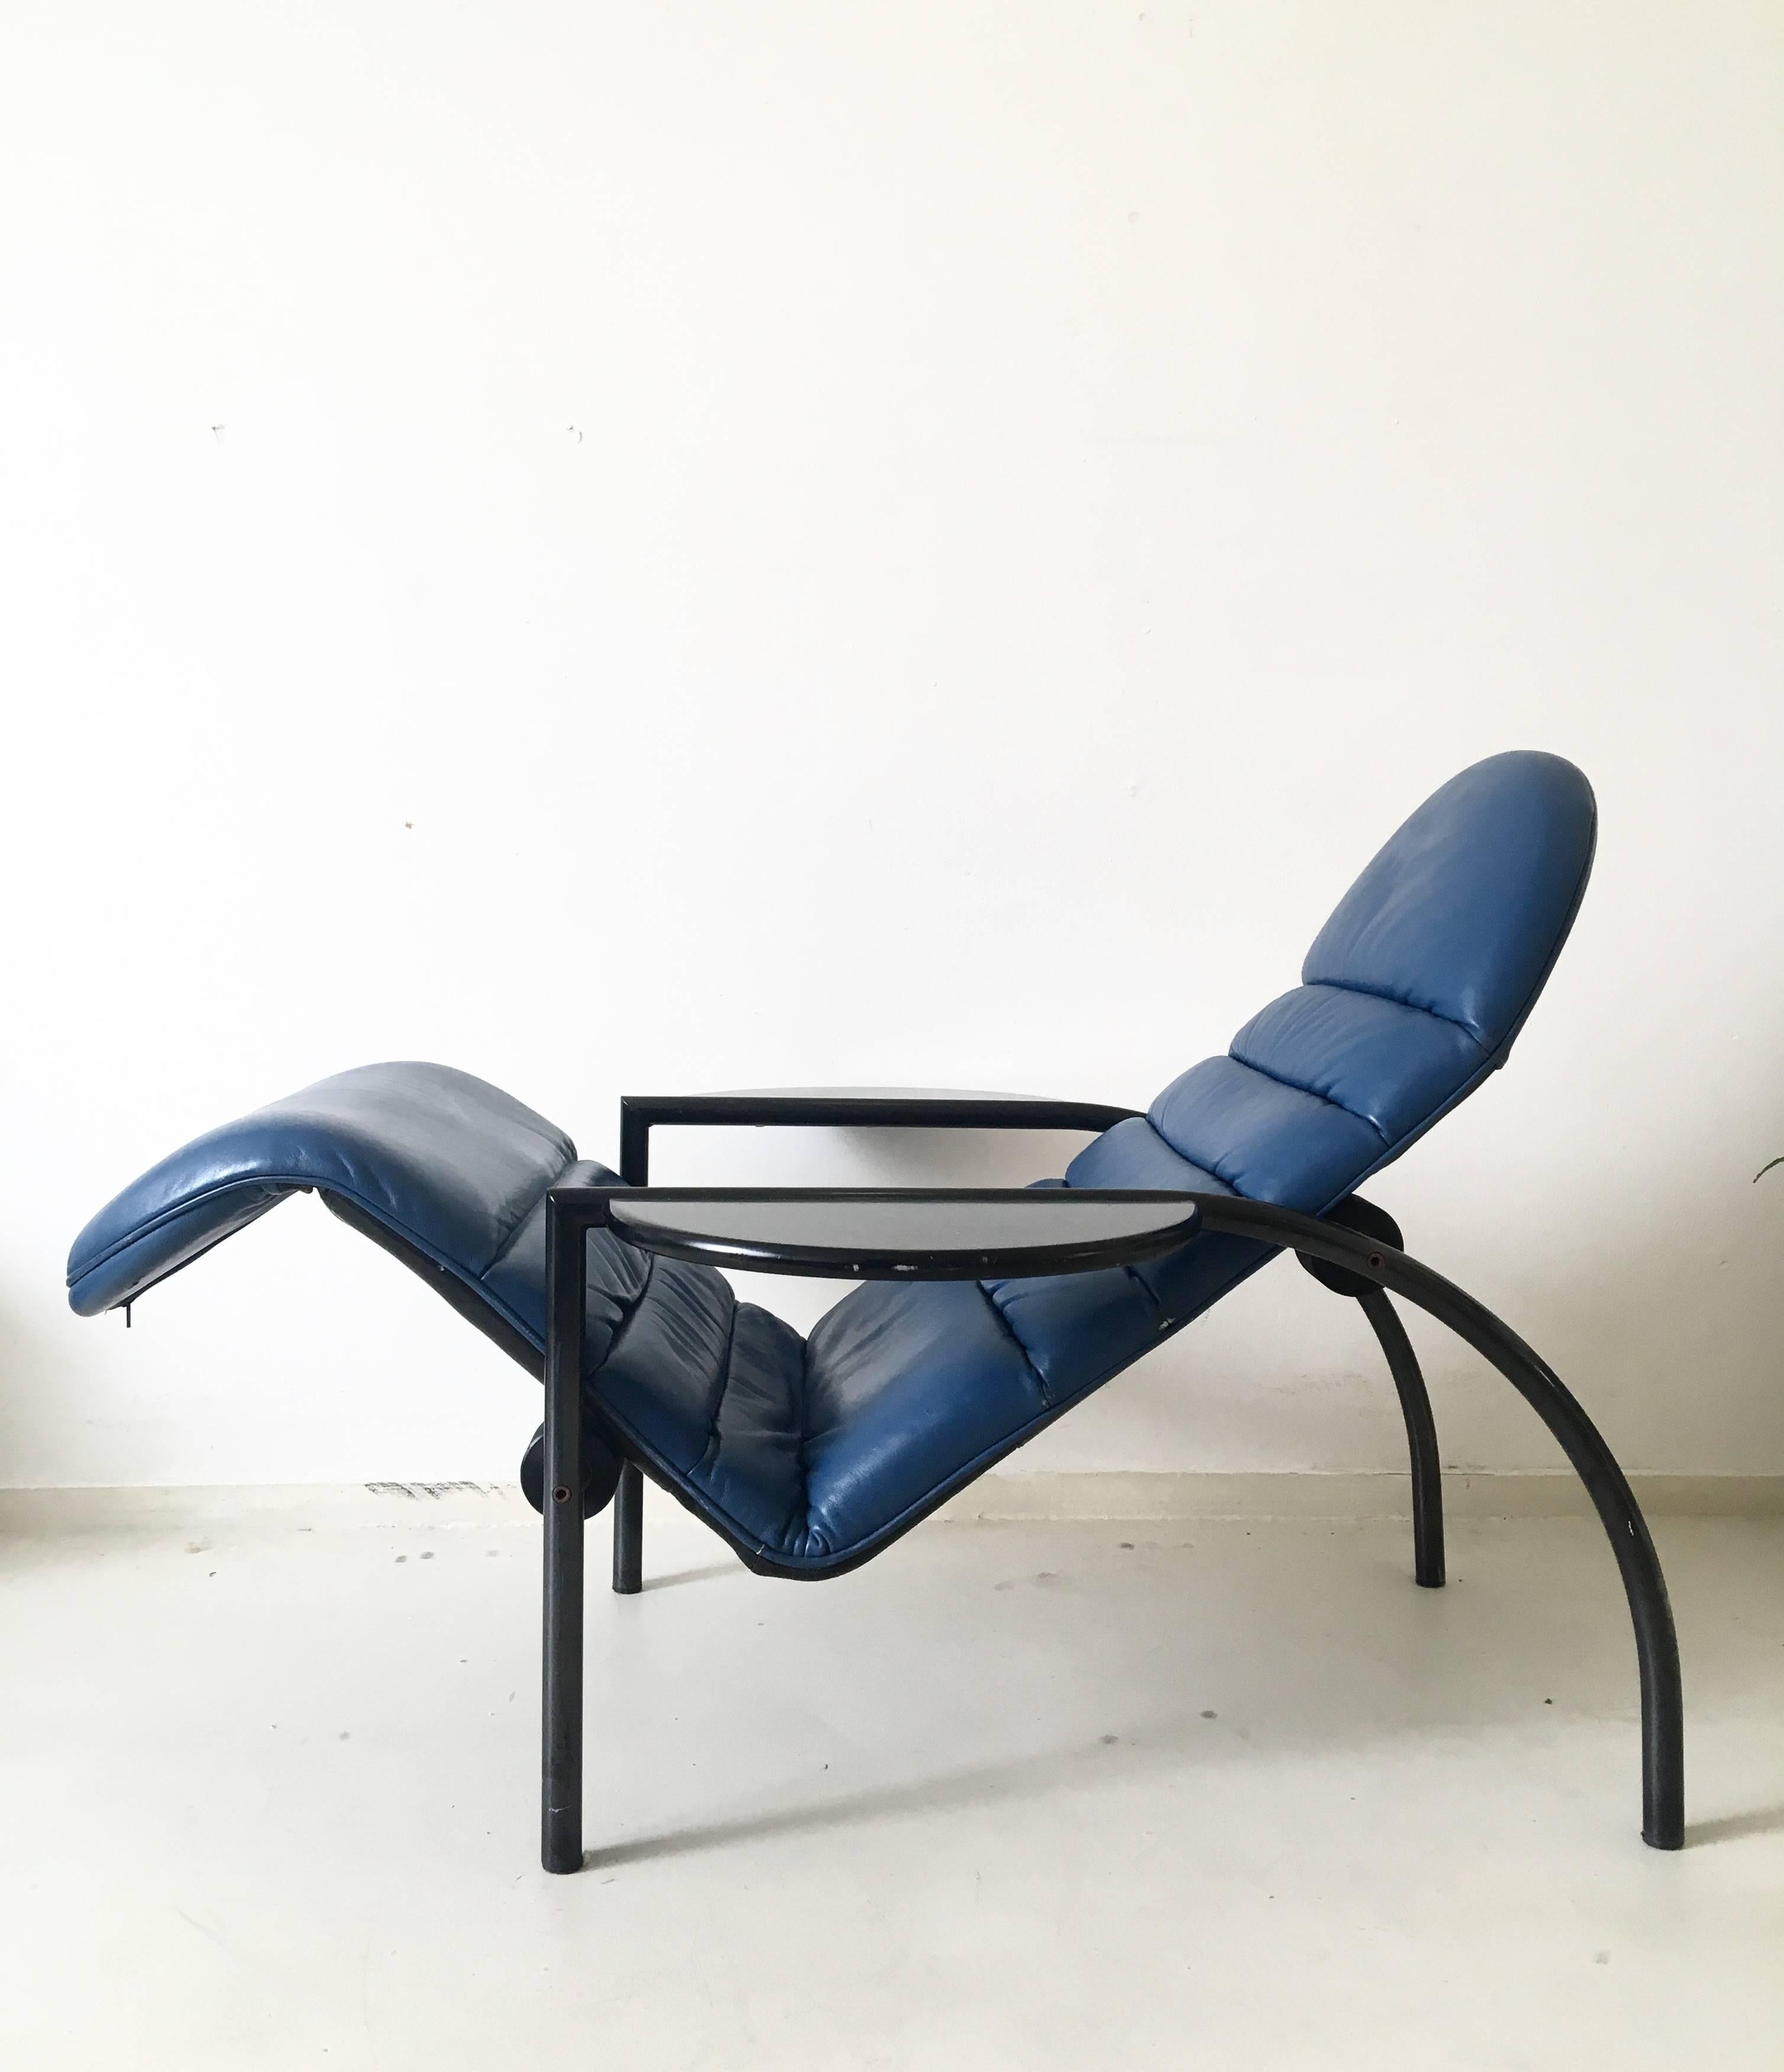 Lacquered Extreme Rare Adjustable Lounge Chair by Ammanati and Vitelli for Moroso, 1980s For Sale